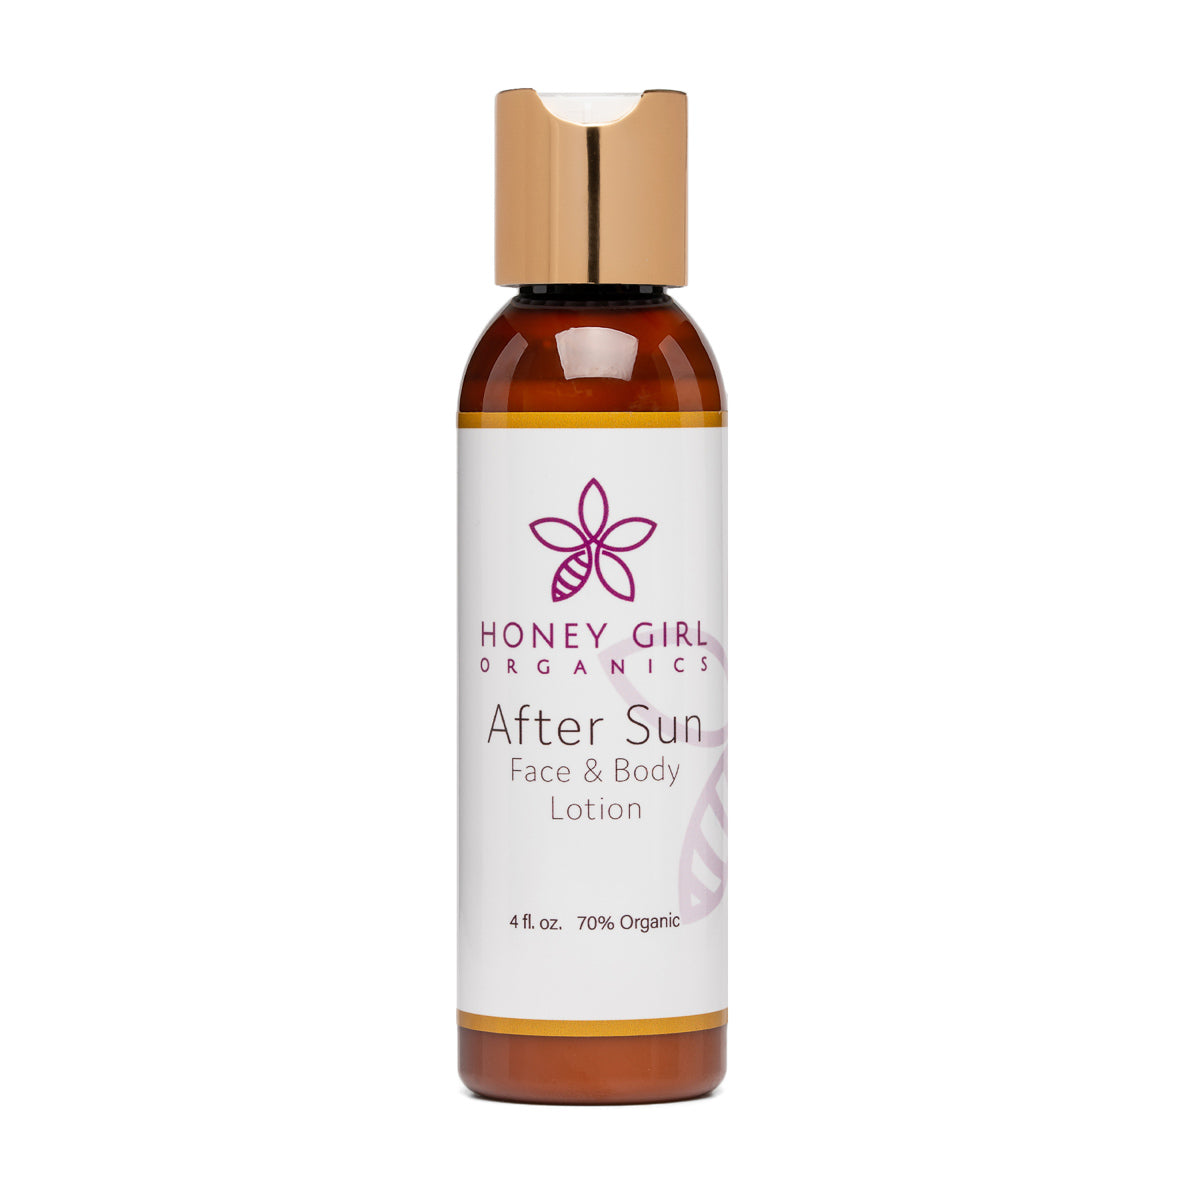 After Sun Face &amp; Body Lotion | Honey Girl Organics | Raw Living UK | Skin Care | Beauty | Honey Girl Organics After Sun Lotion is made with the finest combination of natural ingredients including organic Aloe Gel, Raw Honey, Beeswax &amp; Essential Oils.